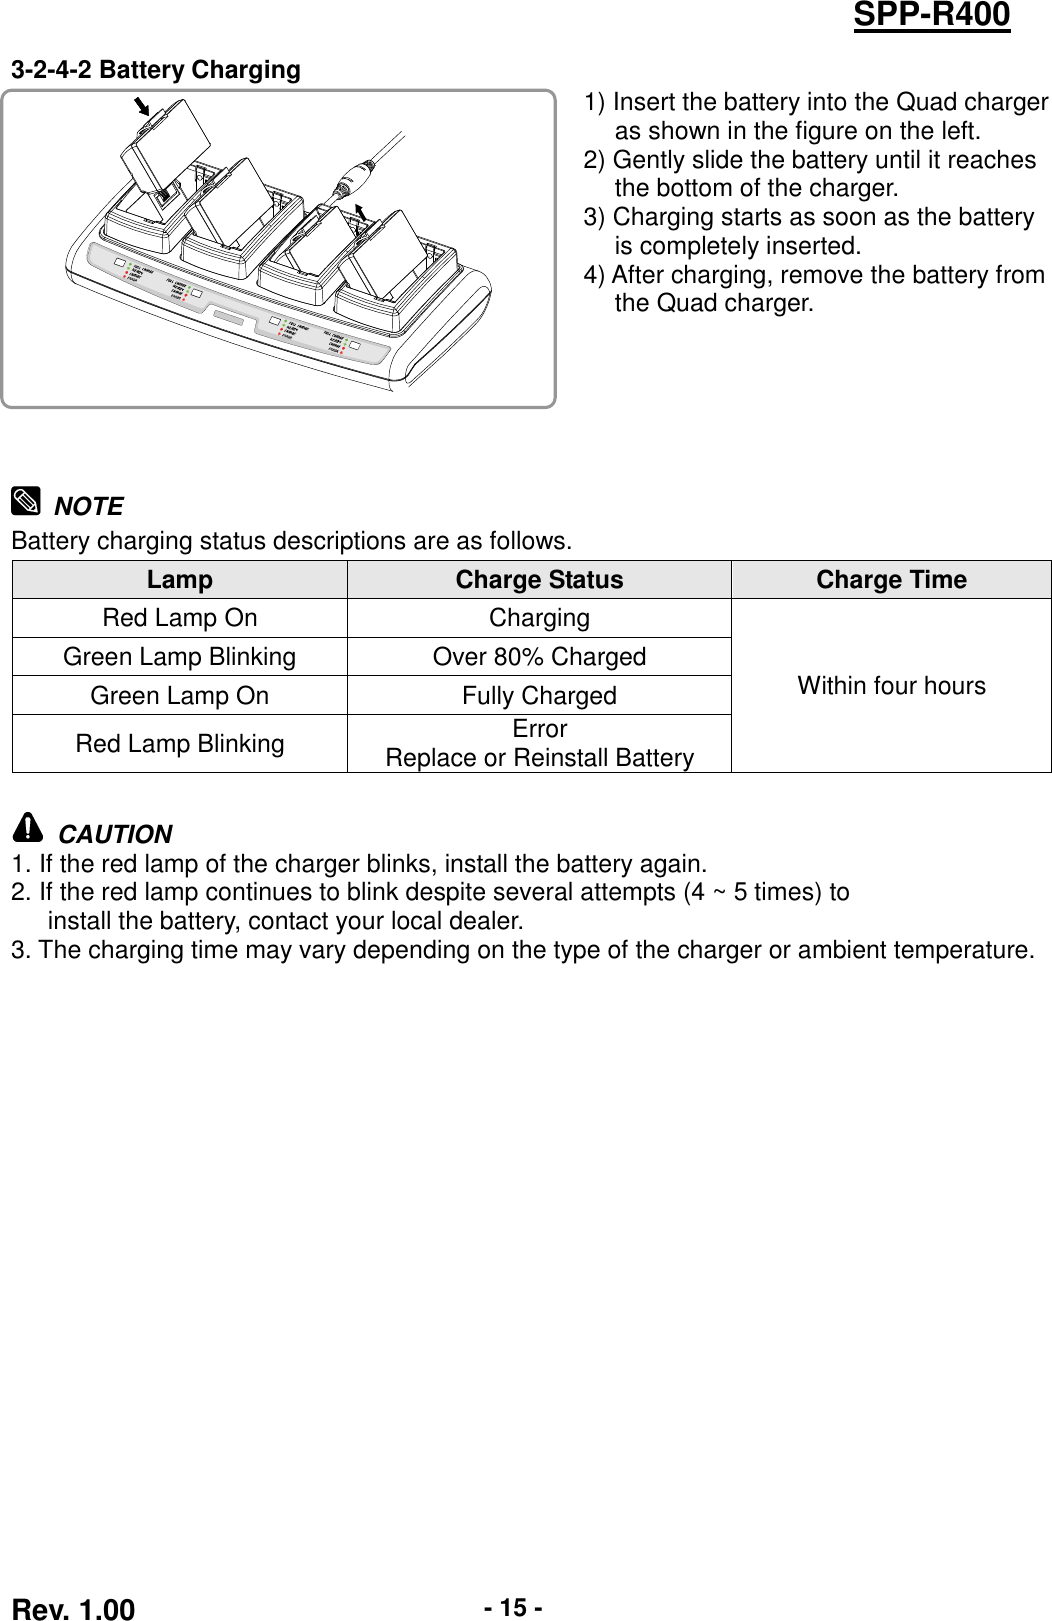  Rev. 1.00 - 15 - SPP-R400 3-2-4-2 Battery Charging  1) Insert the battery into the Quad charger as shown in the figure on the left. 2) Gently slide the battery until it reaches the bottom of the charger. 3) Charging starts as soon as the battery is completely inserted. 4) After charging, remove the battery from the Quad charger.   NOTE Battery charging status descriptions are as follows. Lamp Charge Status Charge Time Red Lamp On Charging Within four hours Green Lamp Blinking Over 80% Charged Green Lamp On Fully Charged Red Lamp Blinking Error Replace or Reinstall Battery   CAUTION 1. If the red lamp of the charger blinks, install the battery again. 2. If the red lamp continues to blink despite several attempts (4 ~ 5 times) to   install the battery, contact your local dealer. 3. The charging time may vary depending on the type of the charger or ambient temperature.   